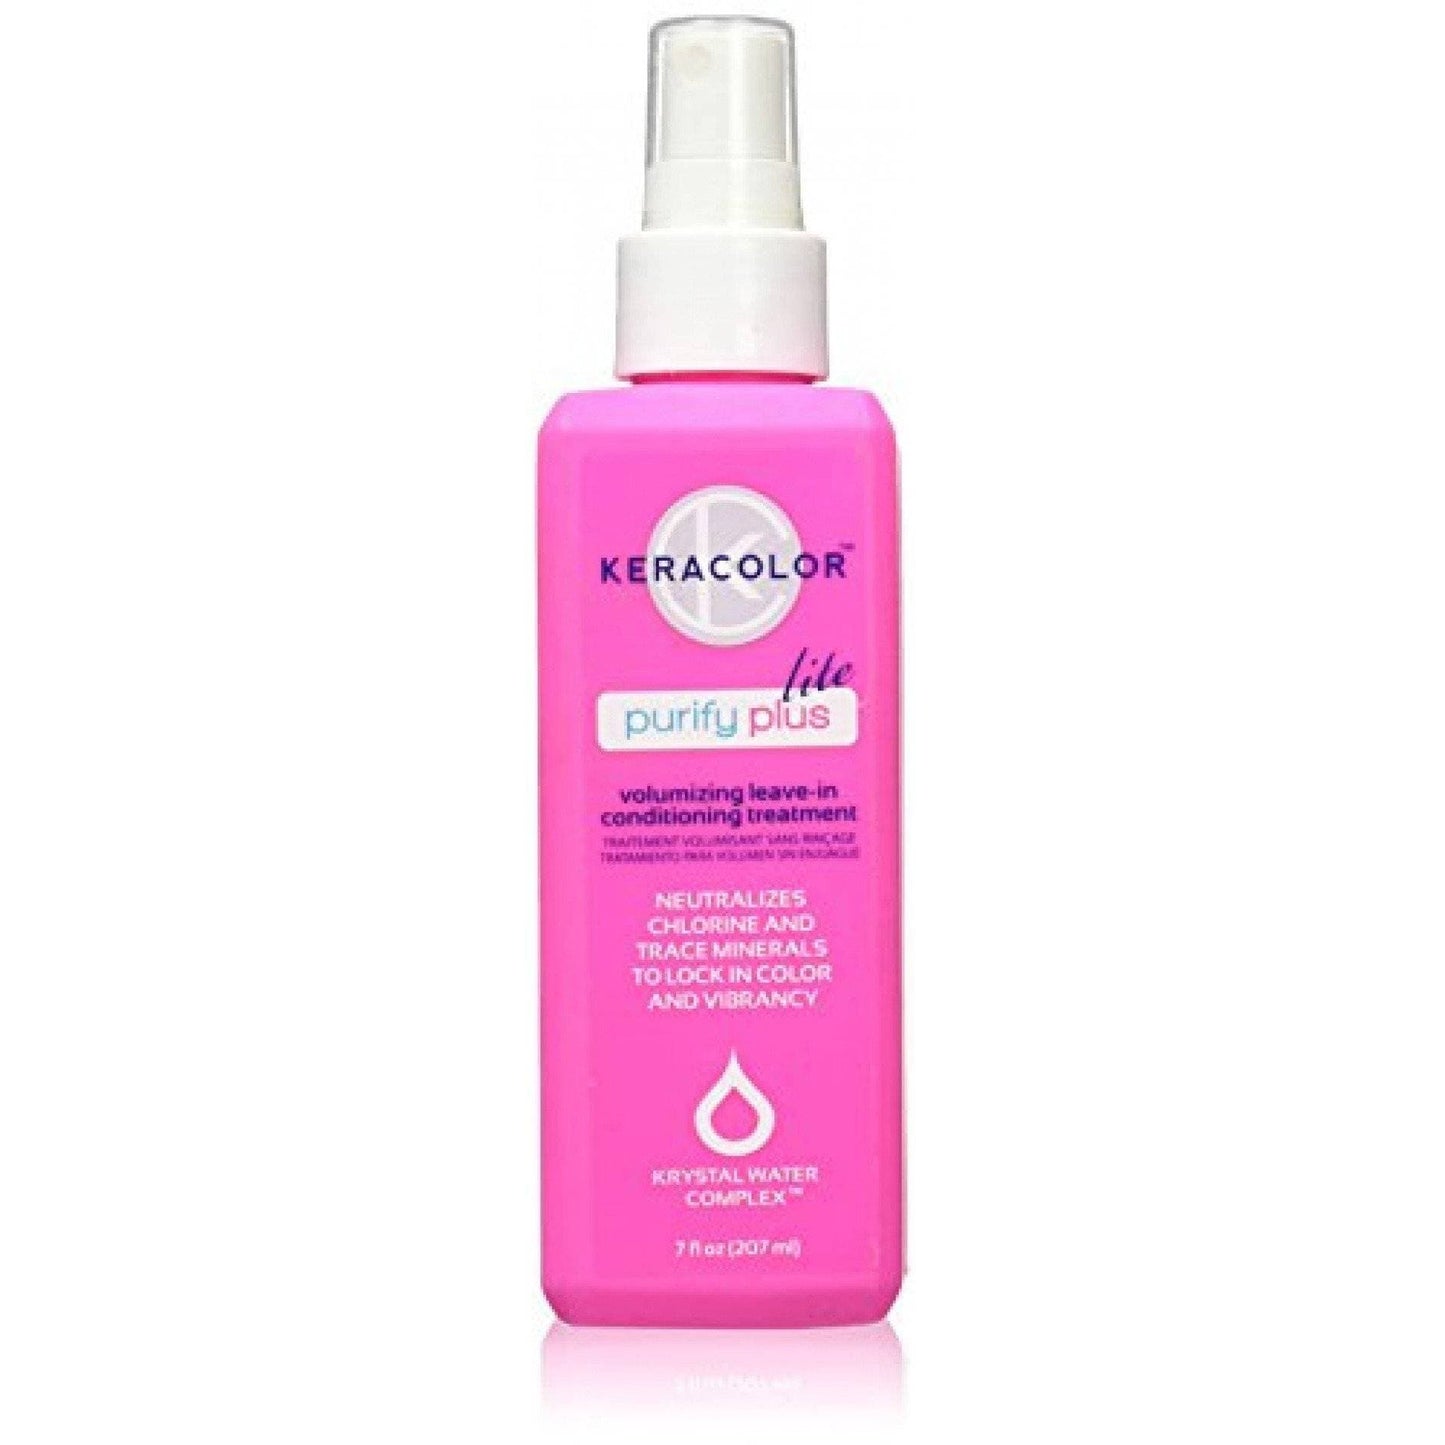 Keracolor Purify Plus Lite Volumizing Leave-In Conditioning Treatment 7oz.